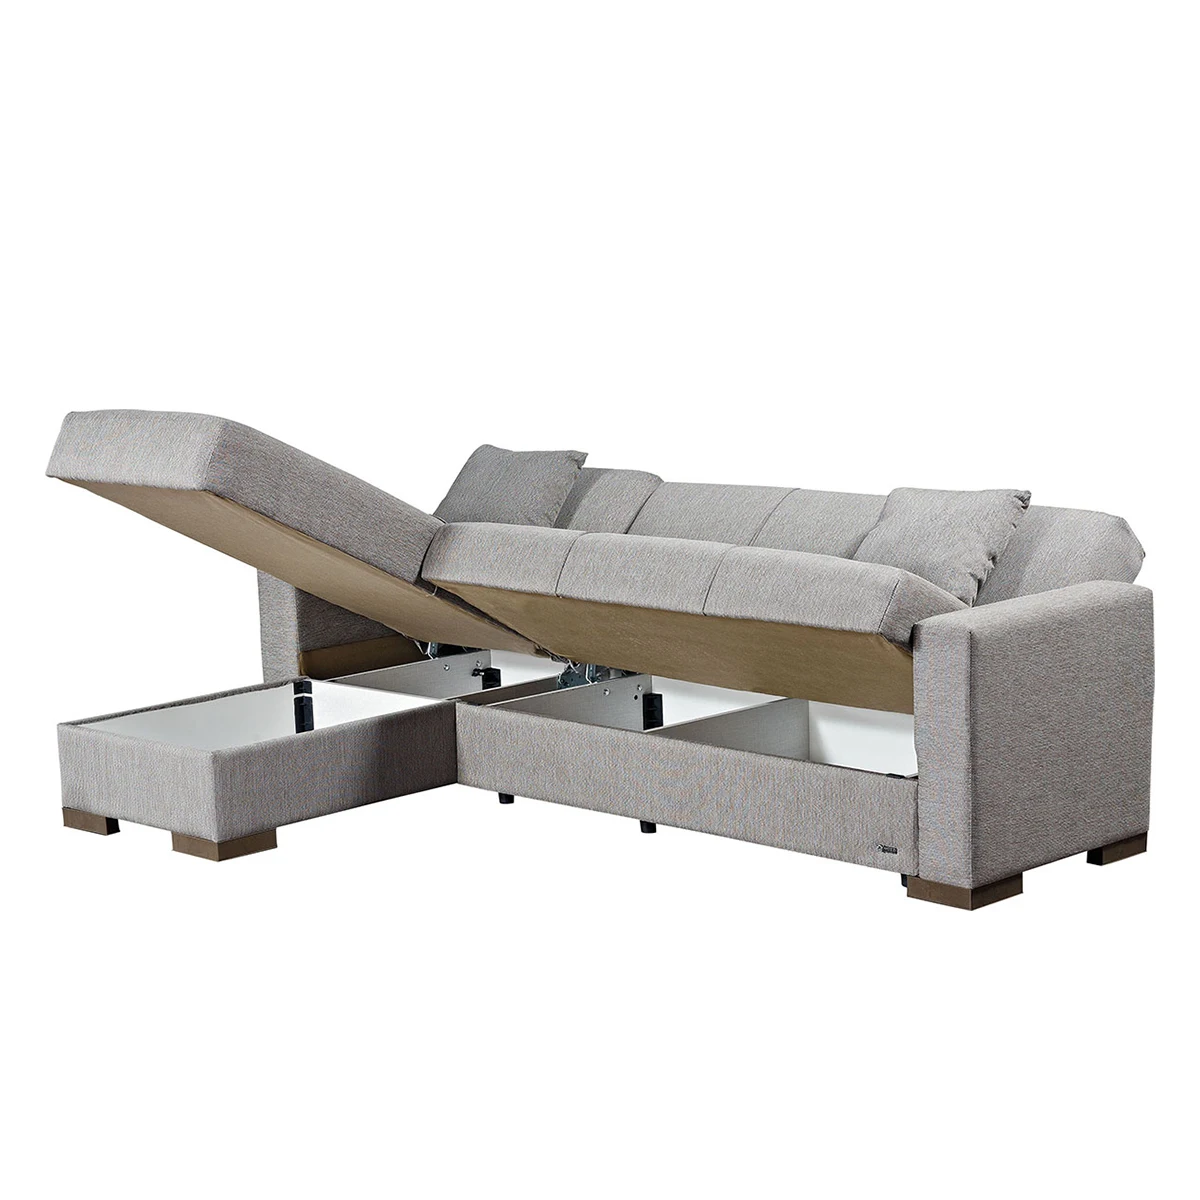 Corner Sectional Sofa Cheap Price Convertible Sofas Economical Hotel And Lobby Elegance Style Turkish New Style Sofa